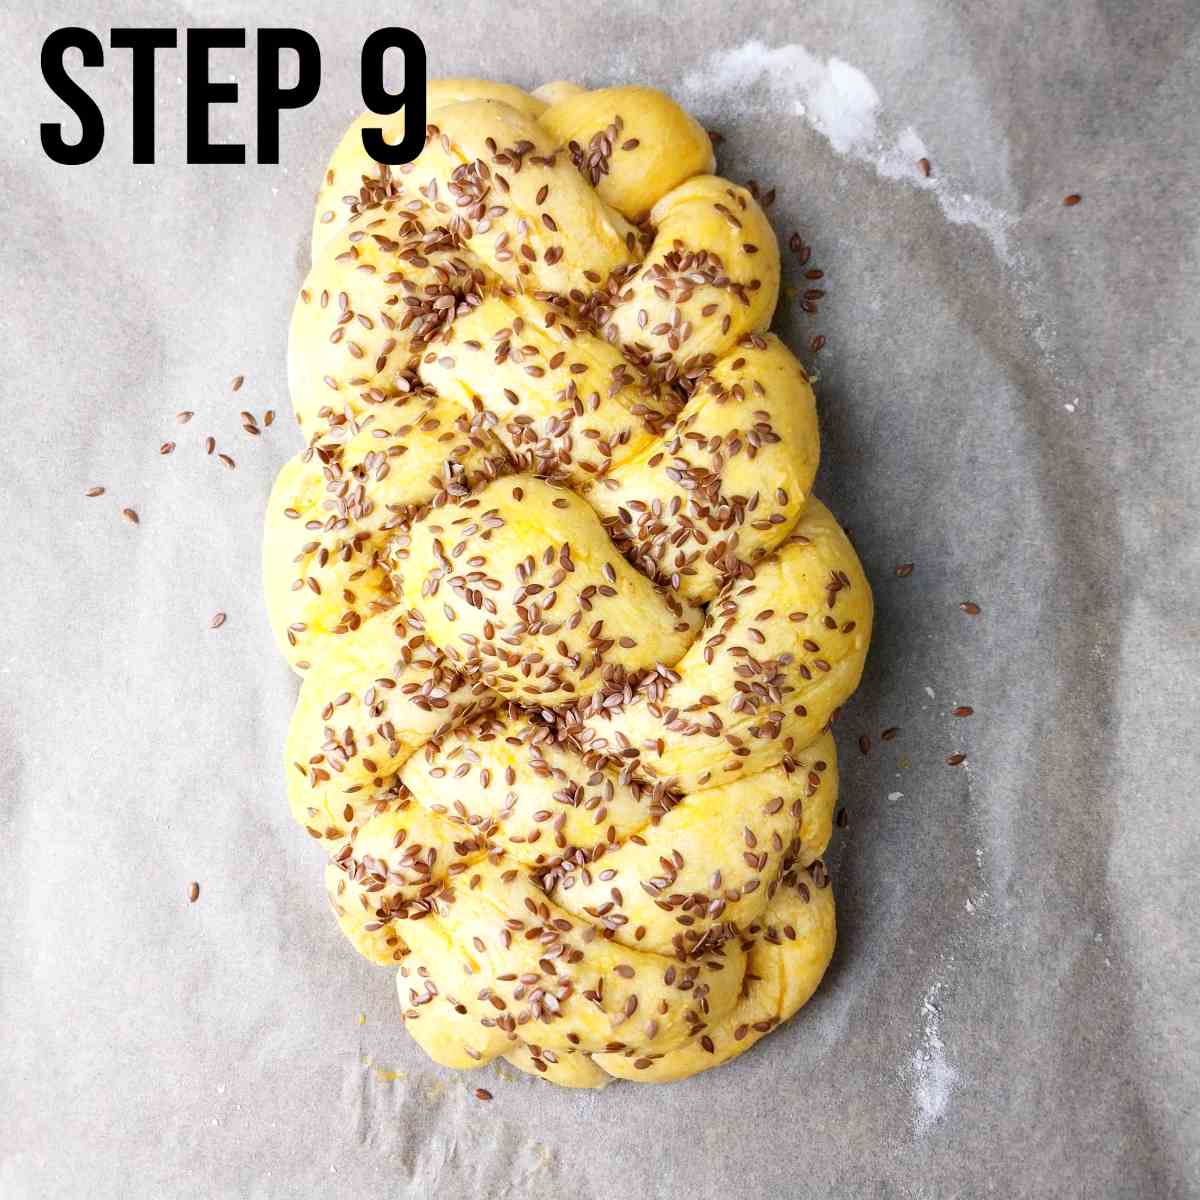 Challah after rising, egg wash, and adding the seeds.